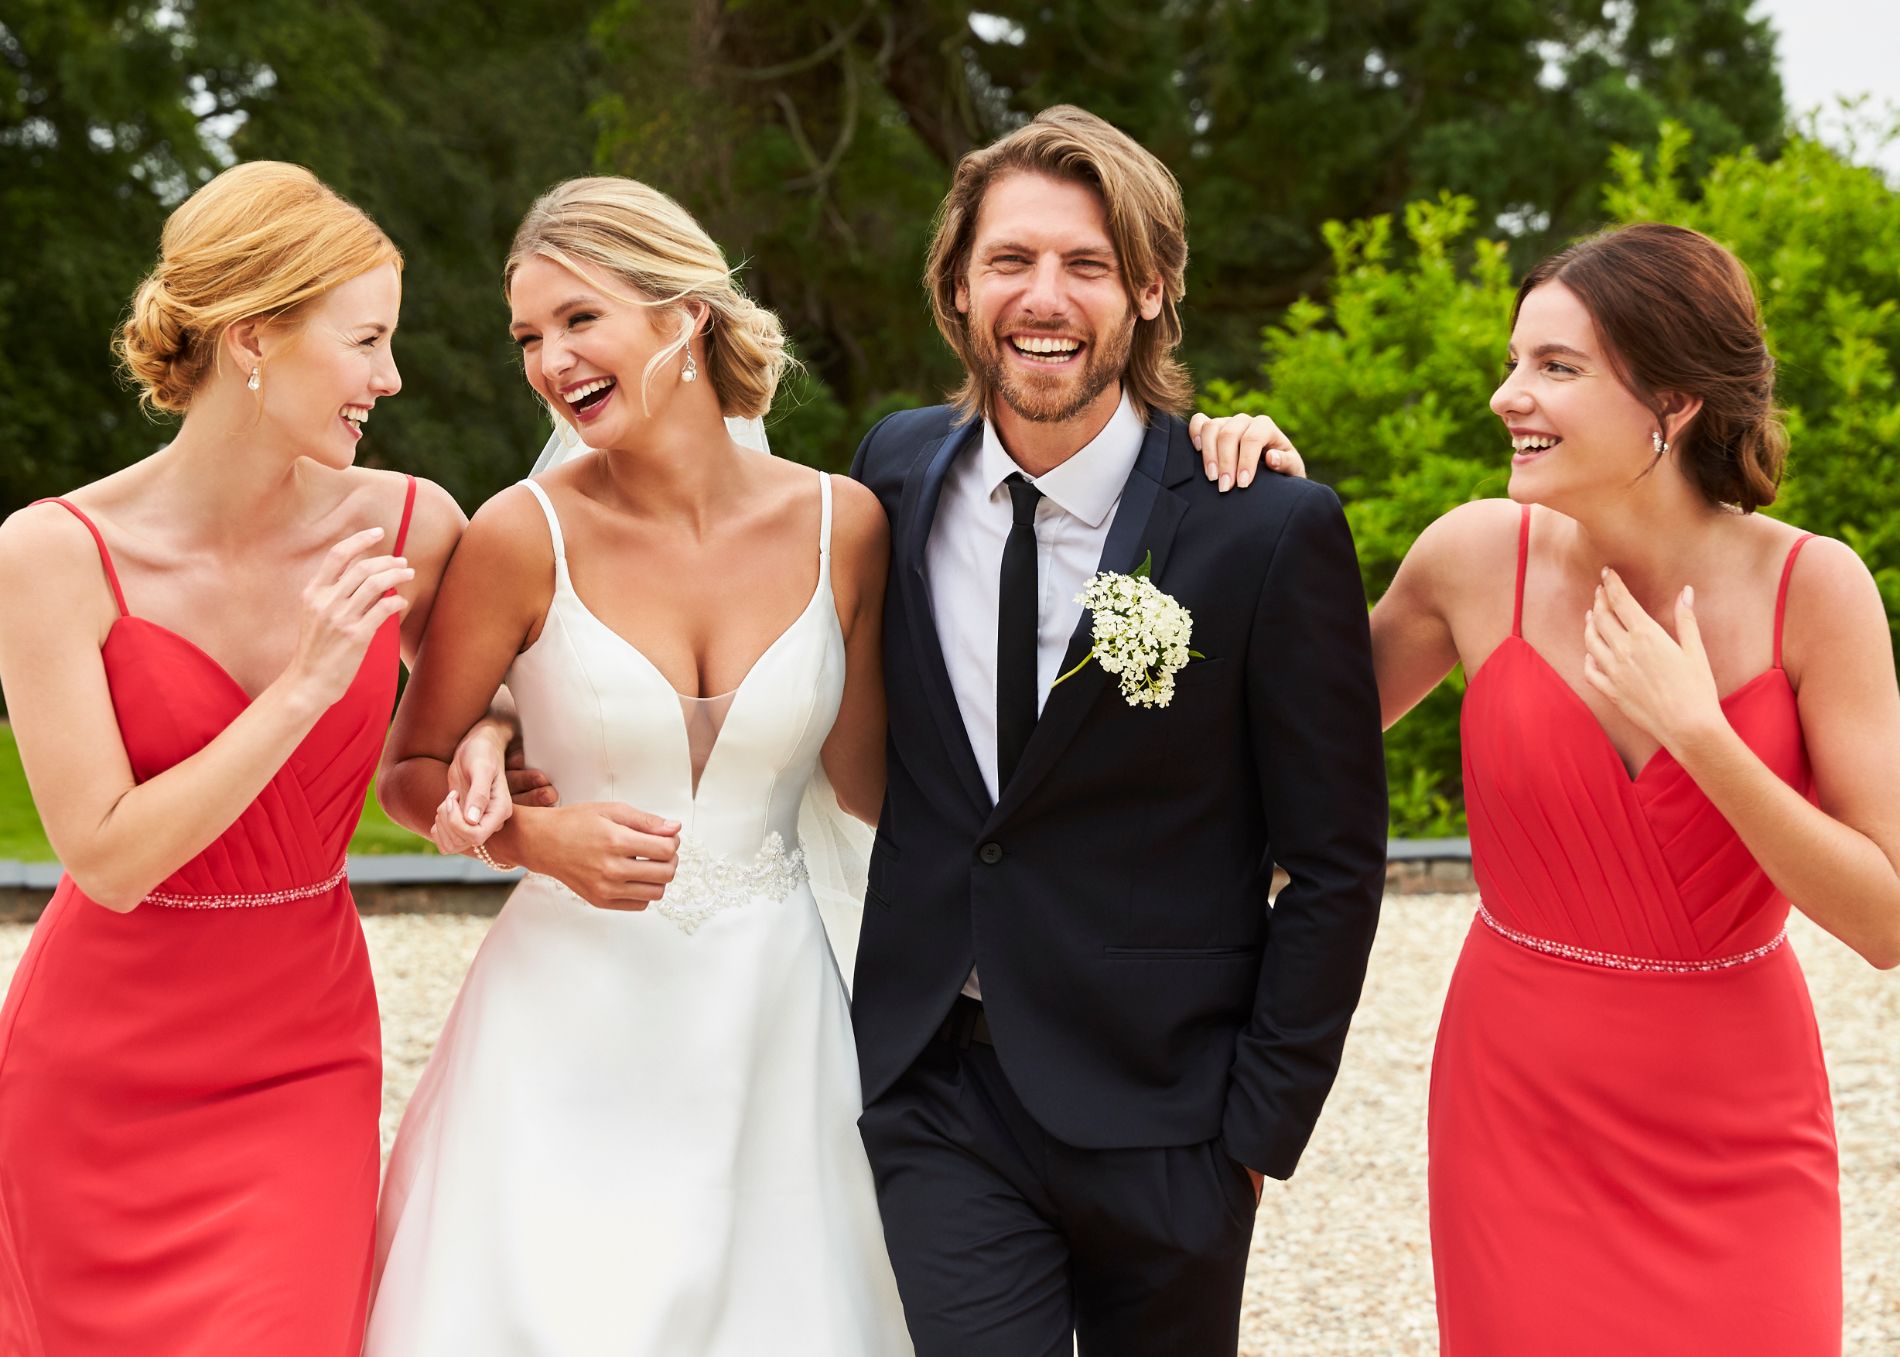 Bride and groom smiling with bridesmaids